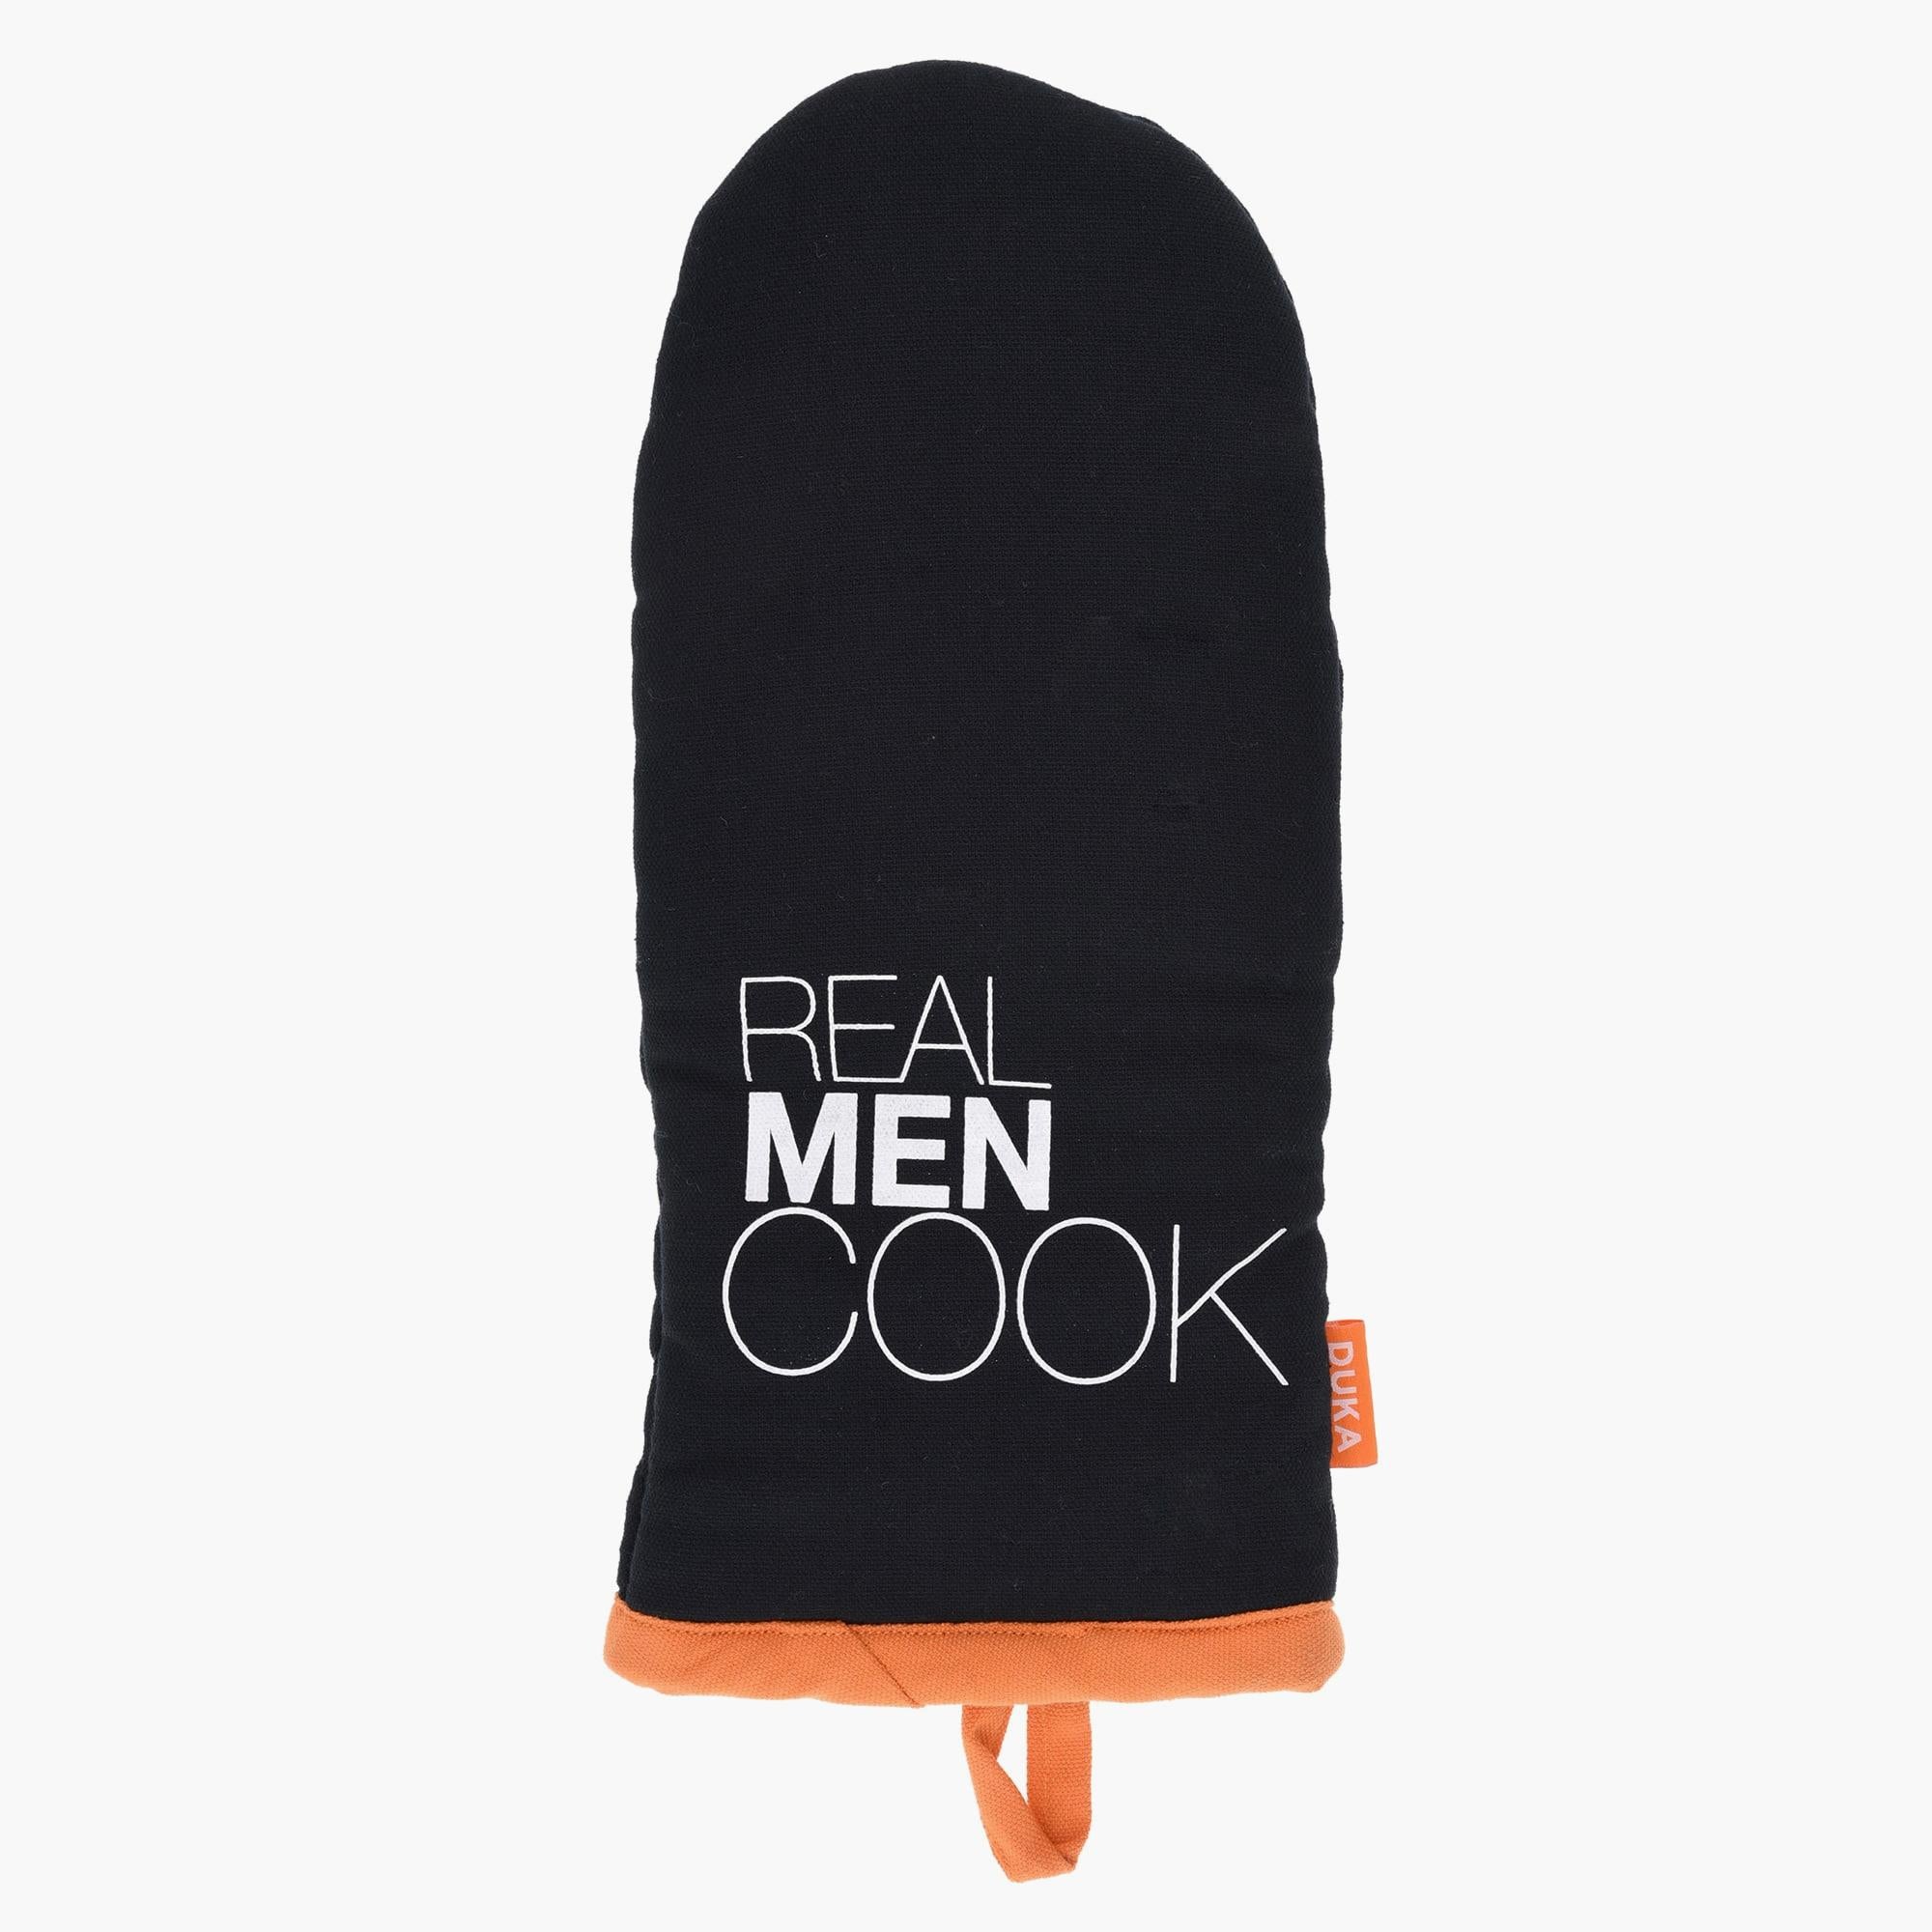 Kitchen "Real Men Cook" Apron and Oven Mitts Set